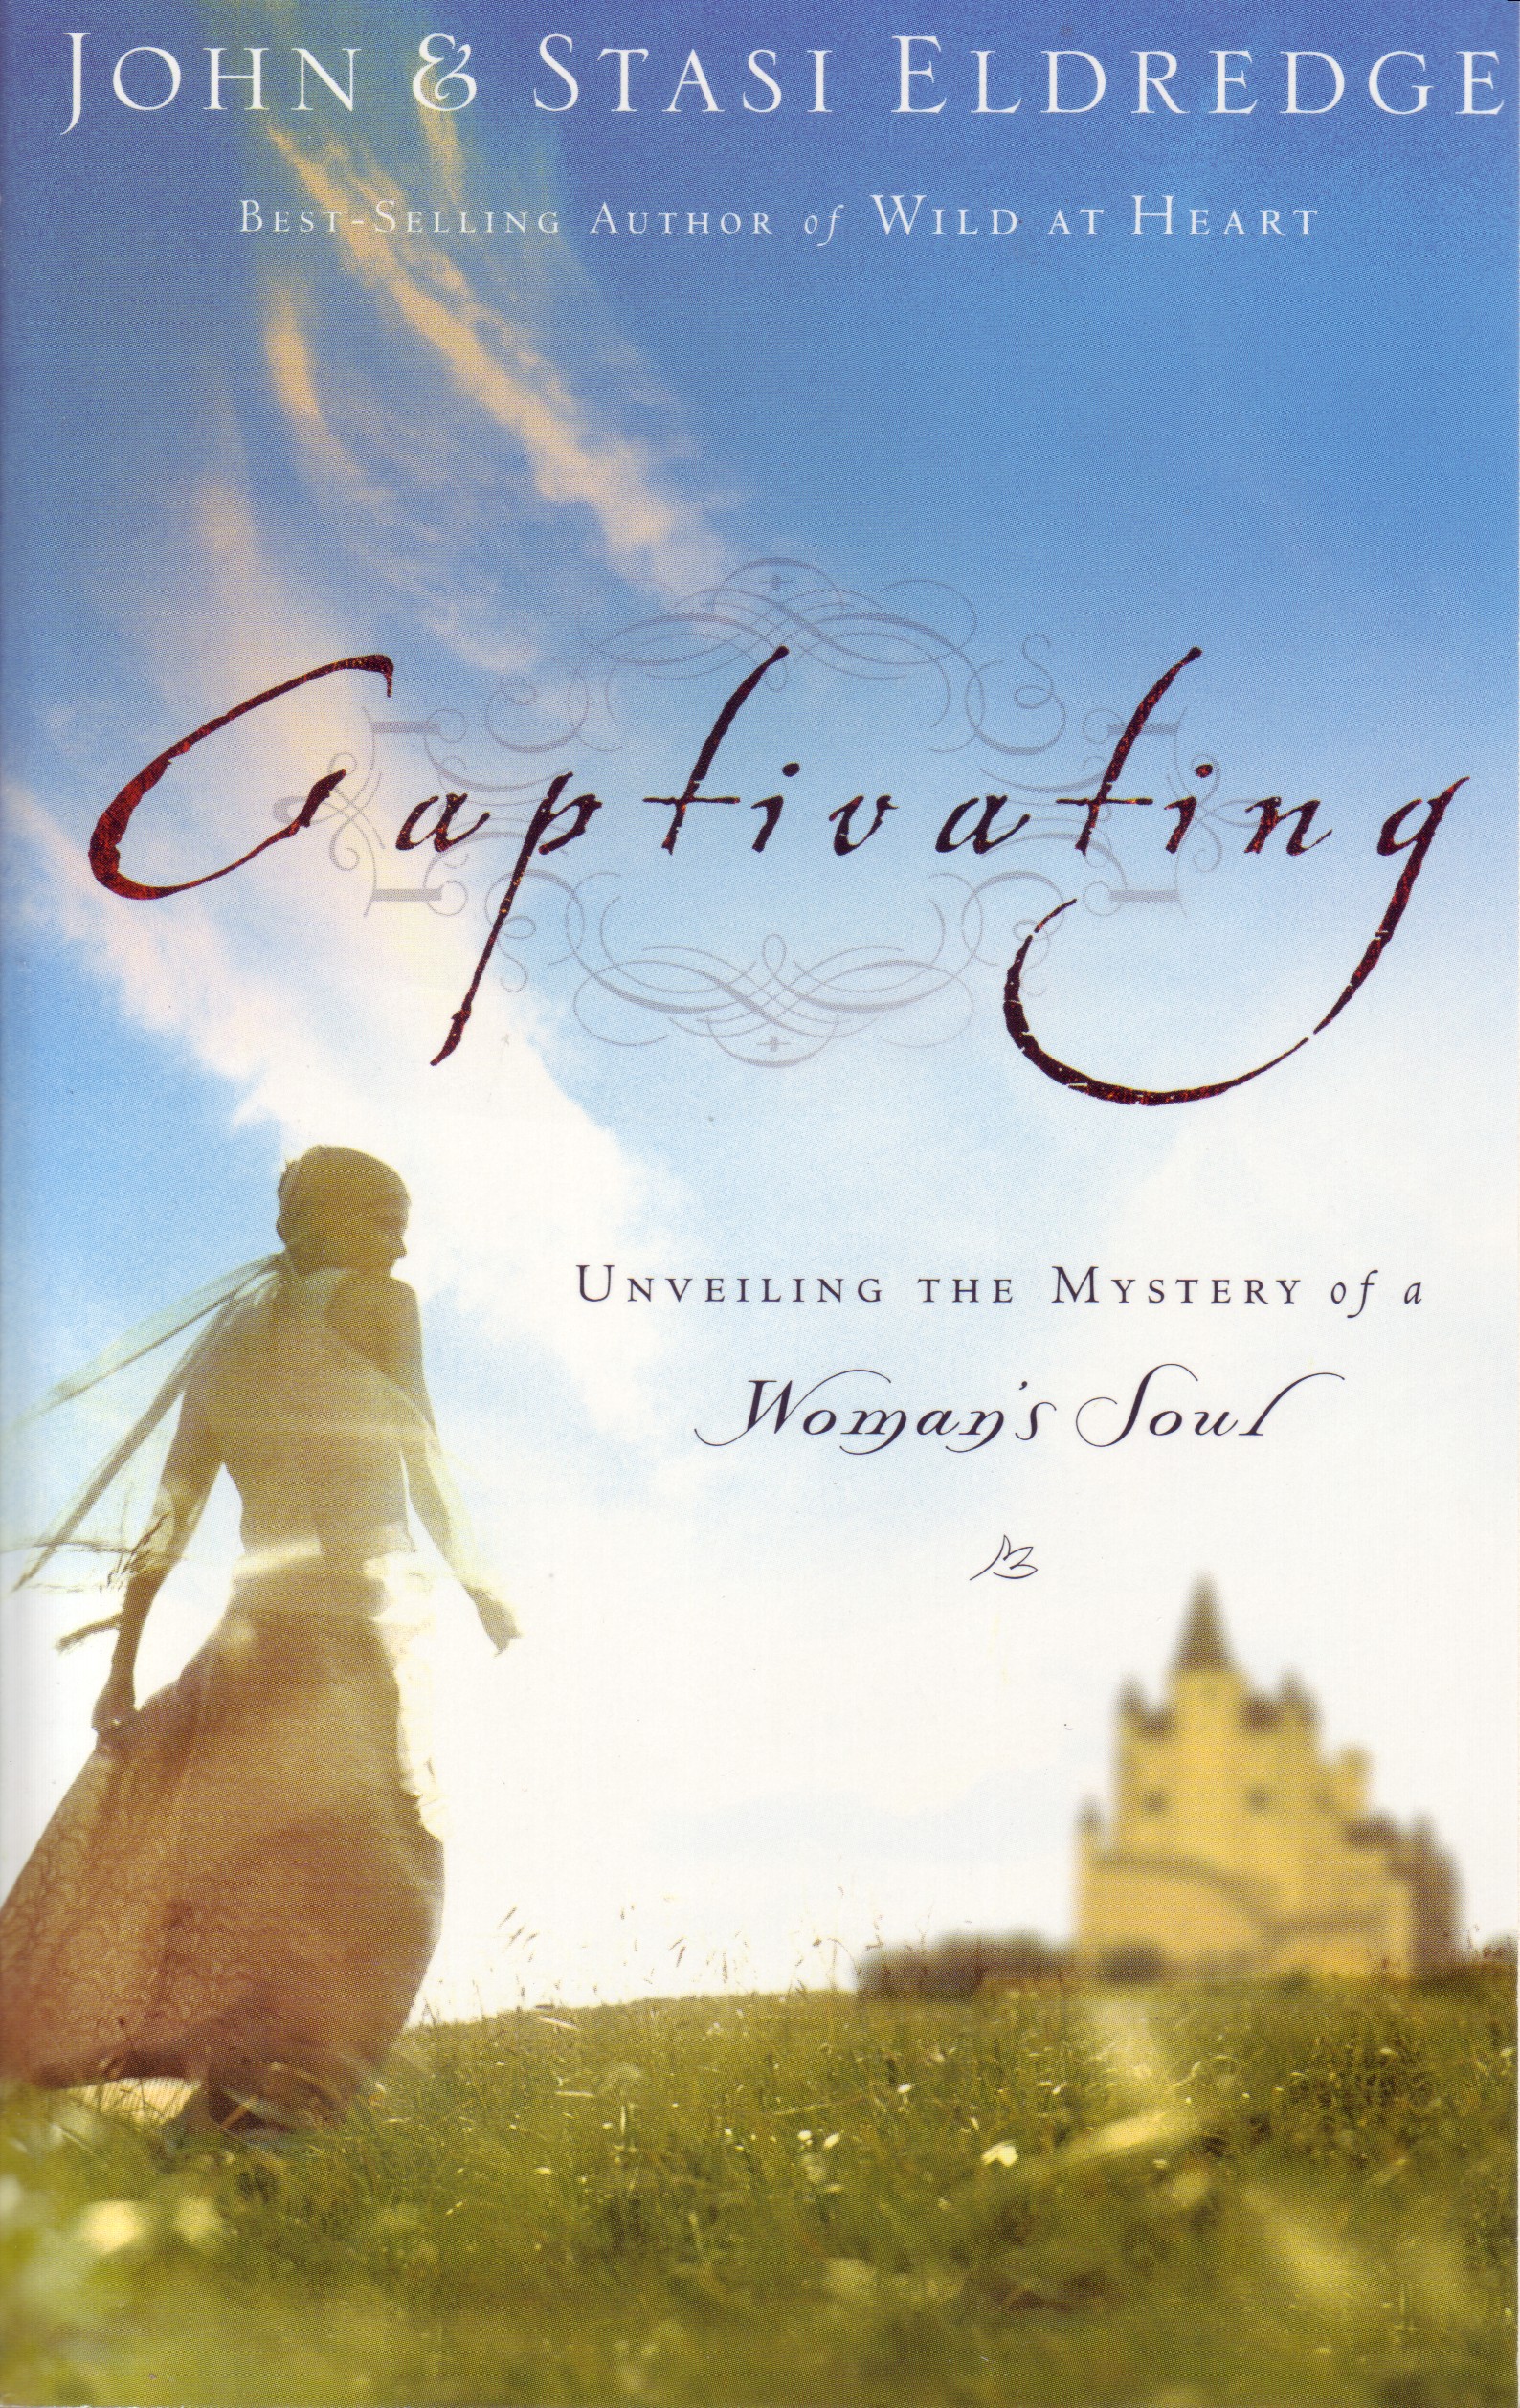 CAPTIVATING - UNVEILING THE MYSTERY OF A WOMAN'S SOUL - REVISED AND EXPANDED